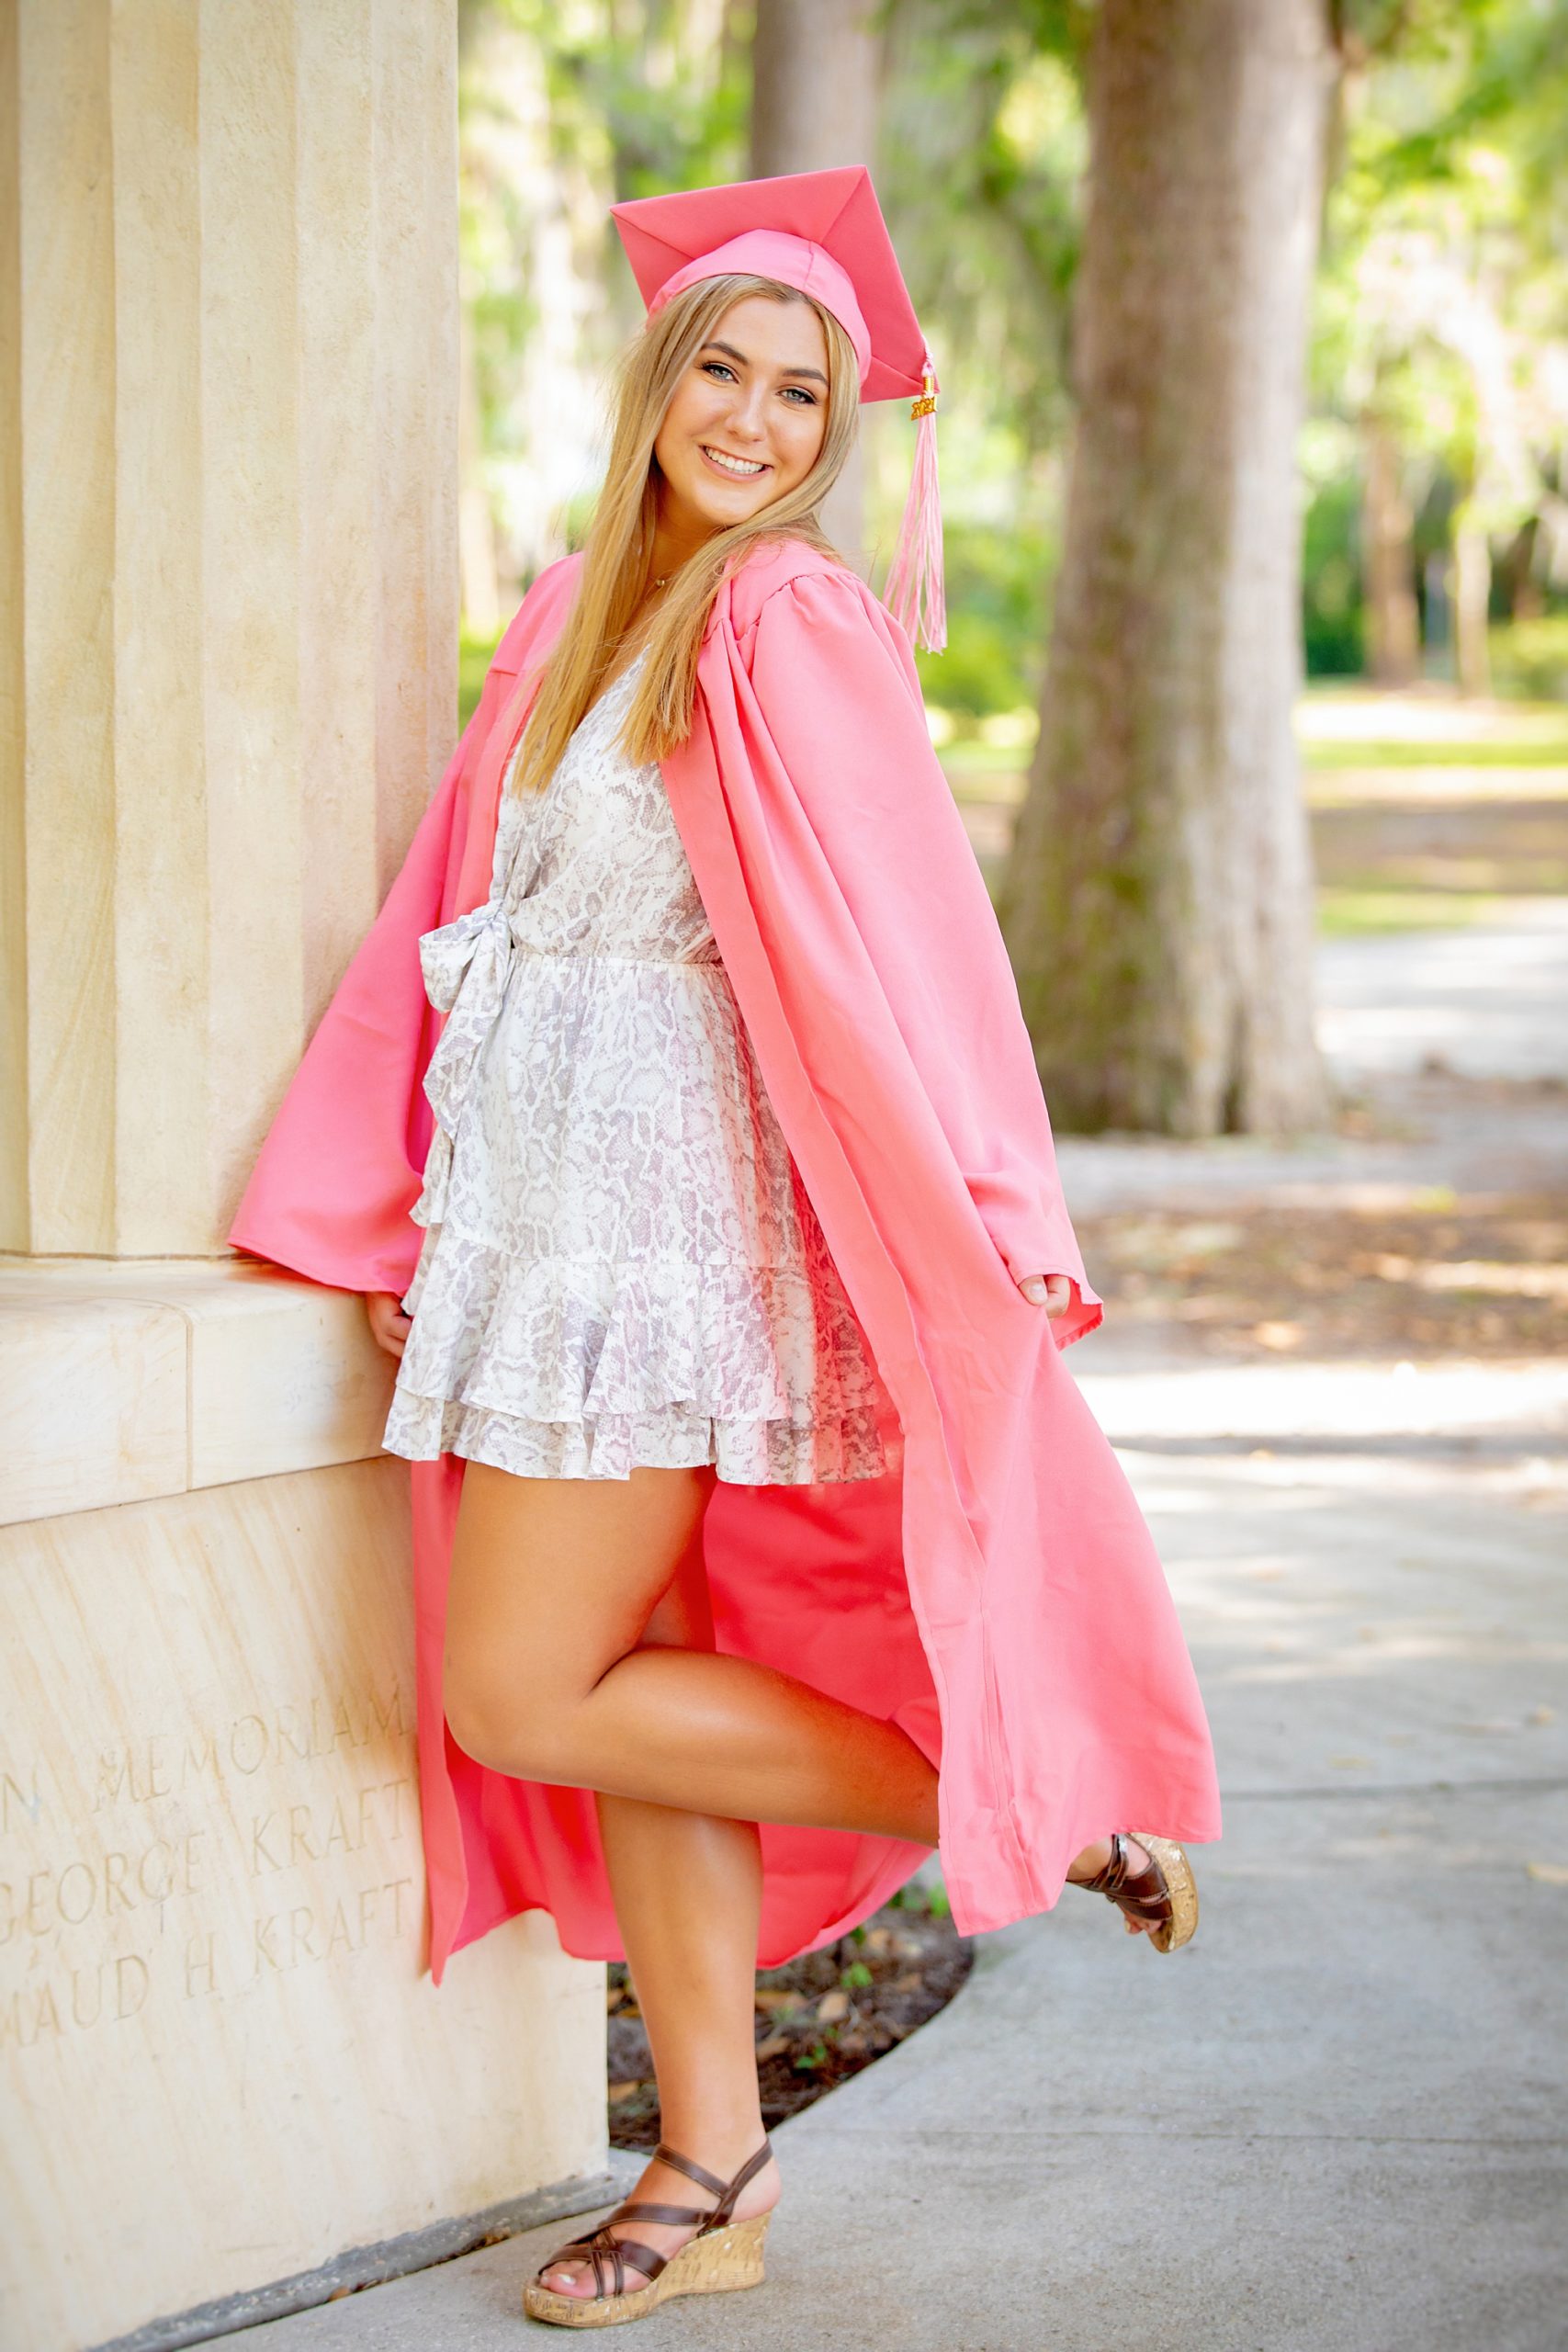 cap and gown senior session 